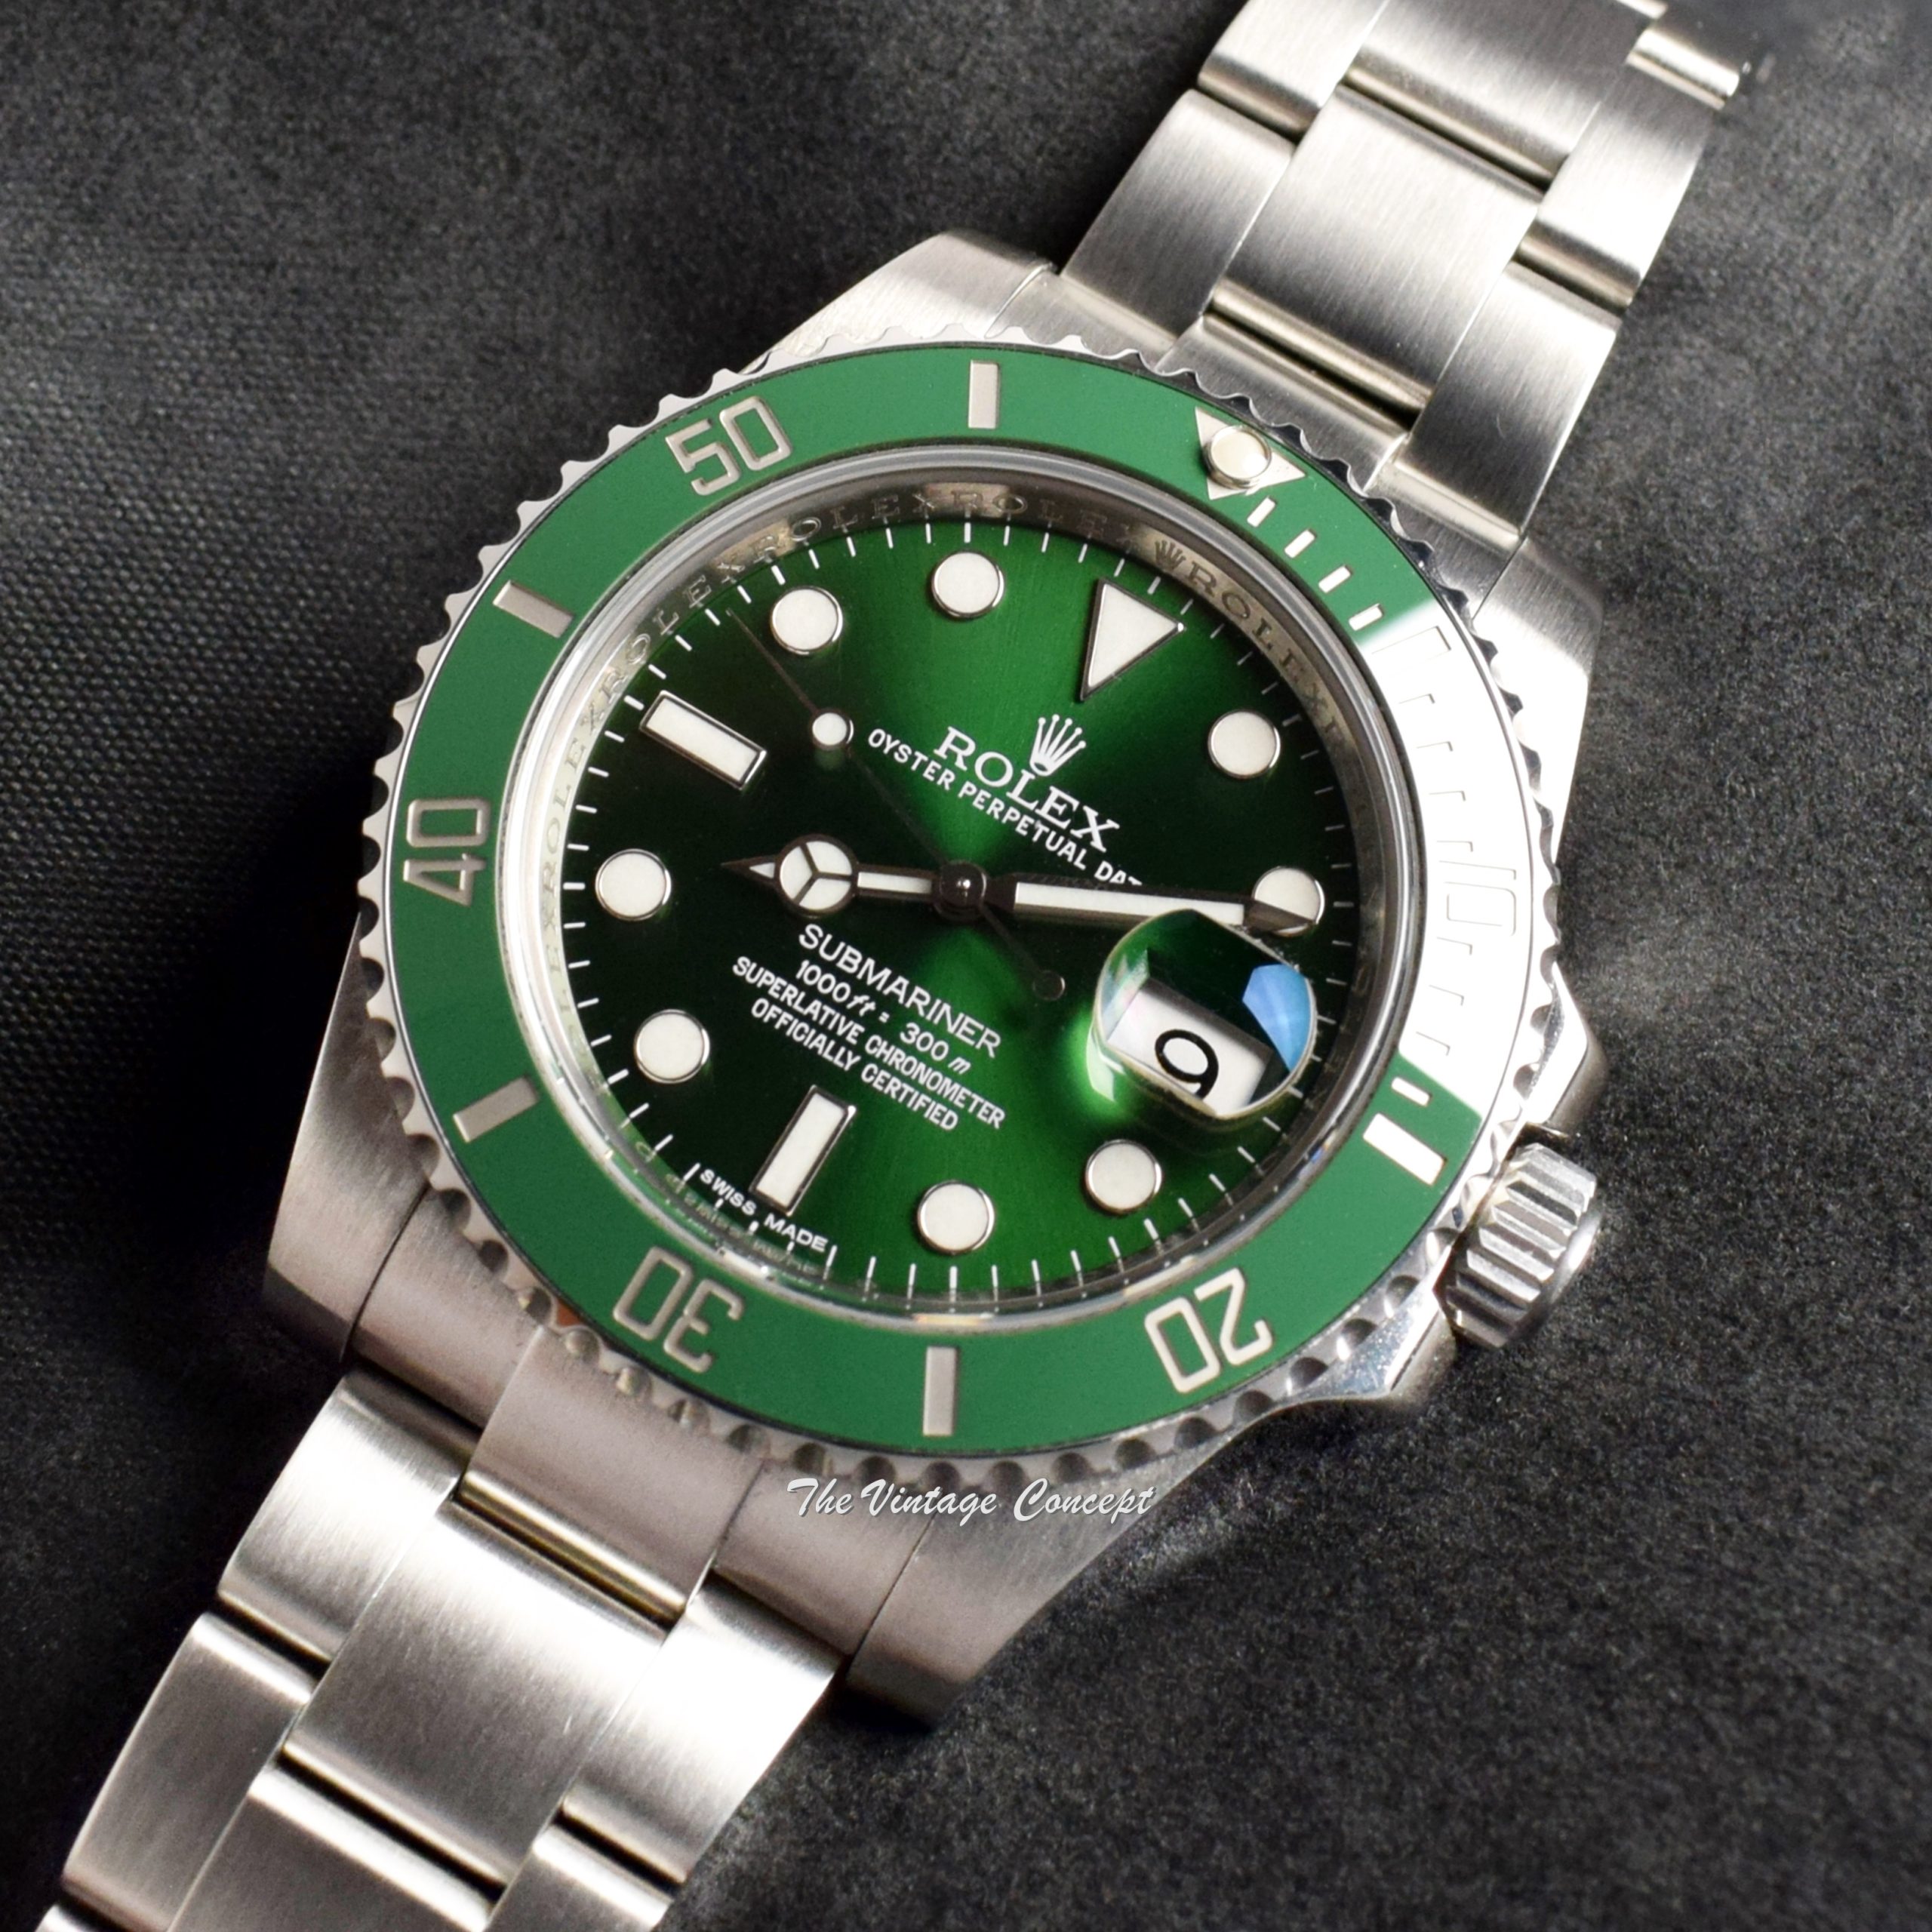 Rolex Submariner Hulk Green Dial Ceramic 116610LV w/ Rolex Guarantee Card  (SOLD) - The Vintage Concept